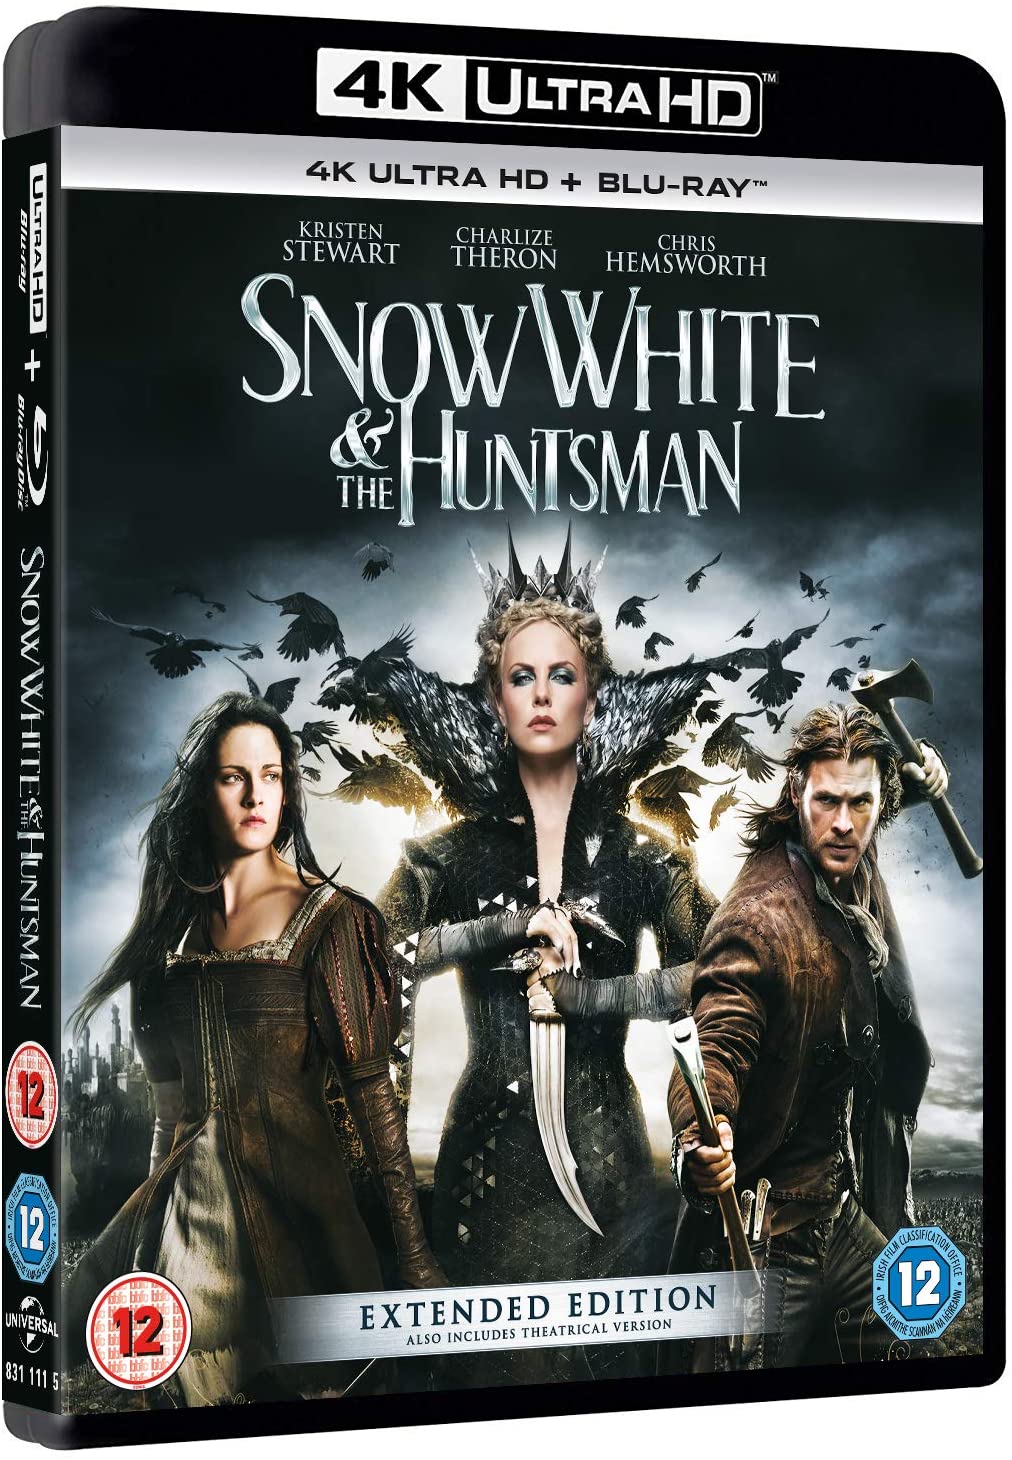 Snow White and the Huntsman [Extended Edition] [2012] (4K Ultra HD + Blu-ray)